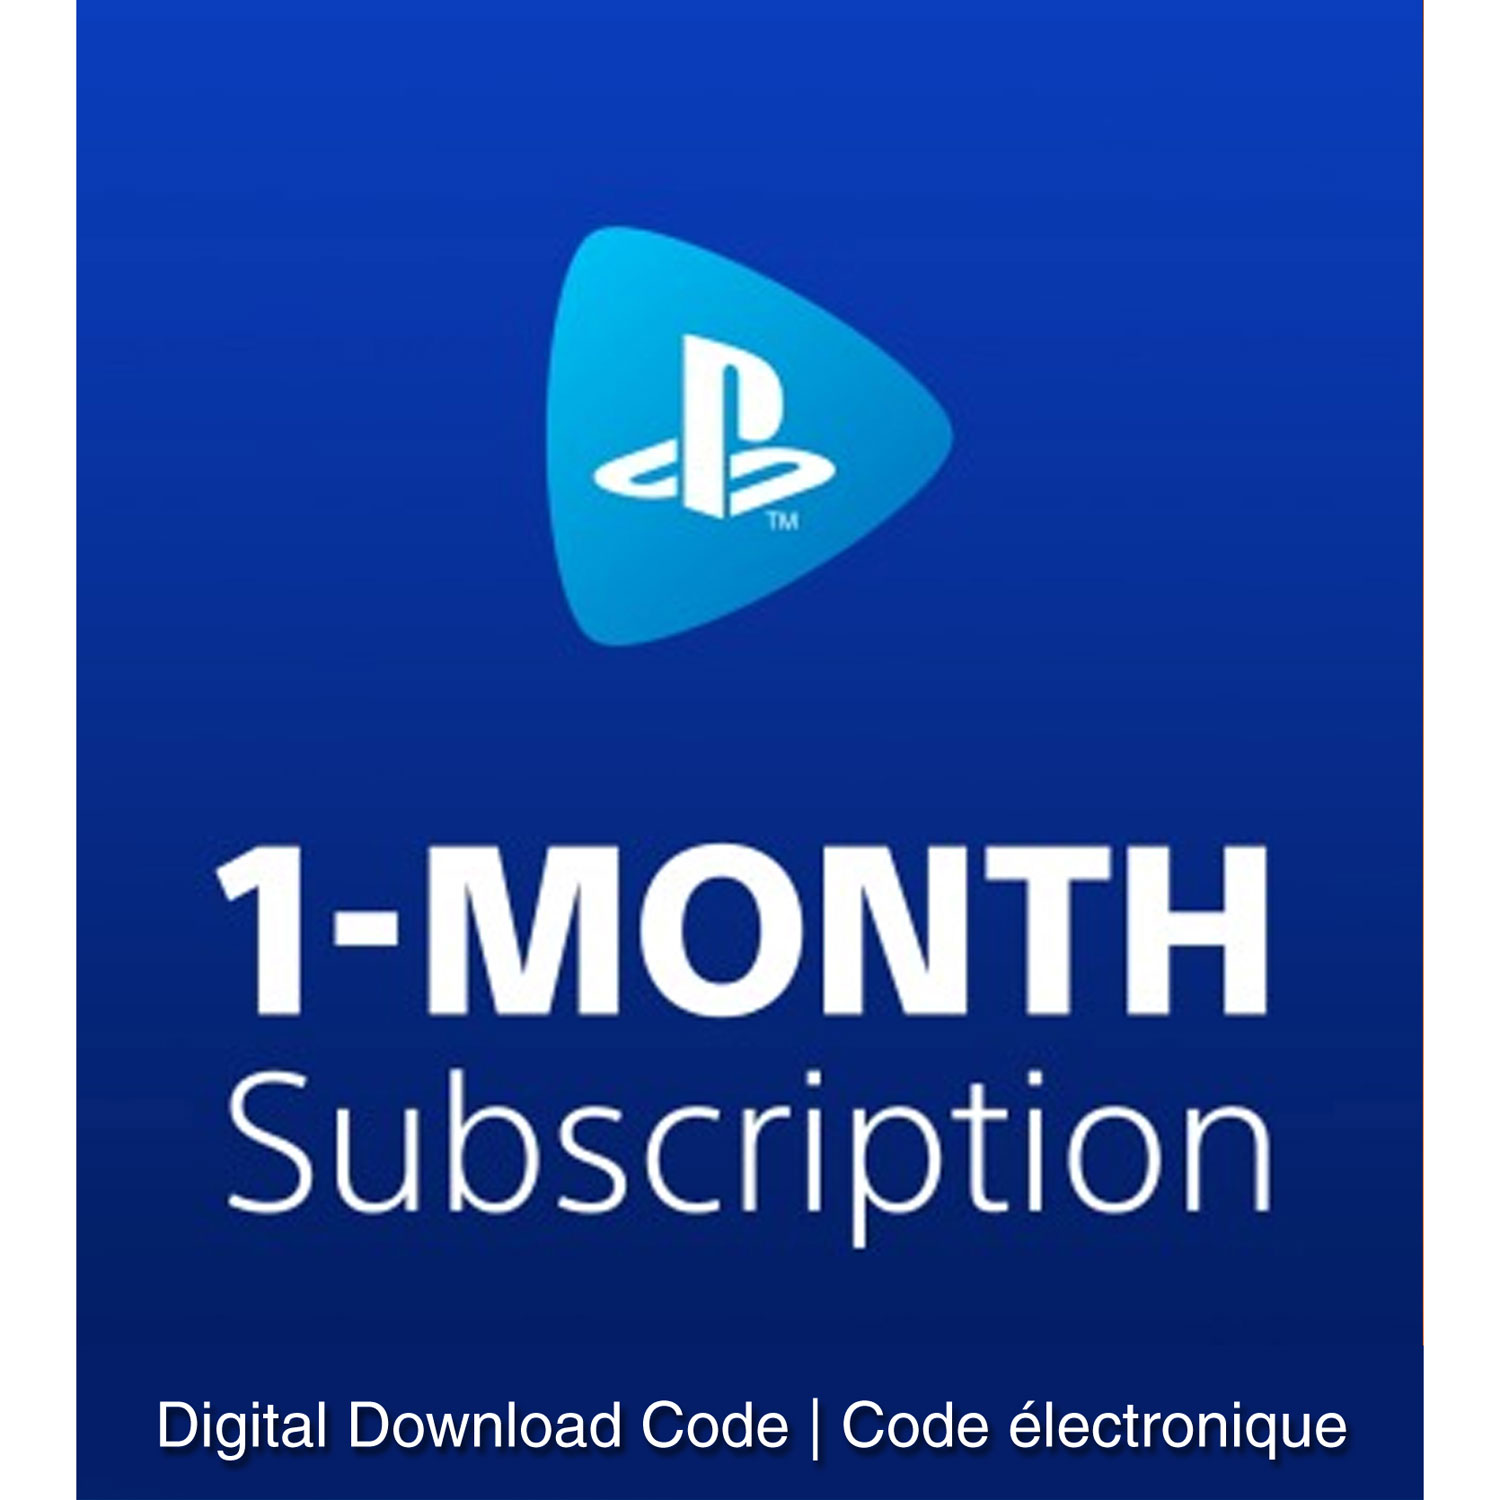 playstation now 1 month